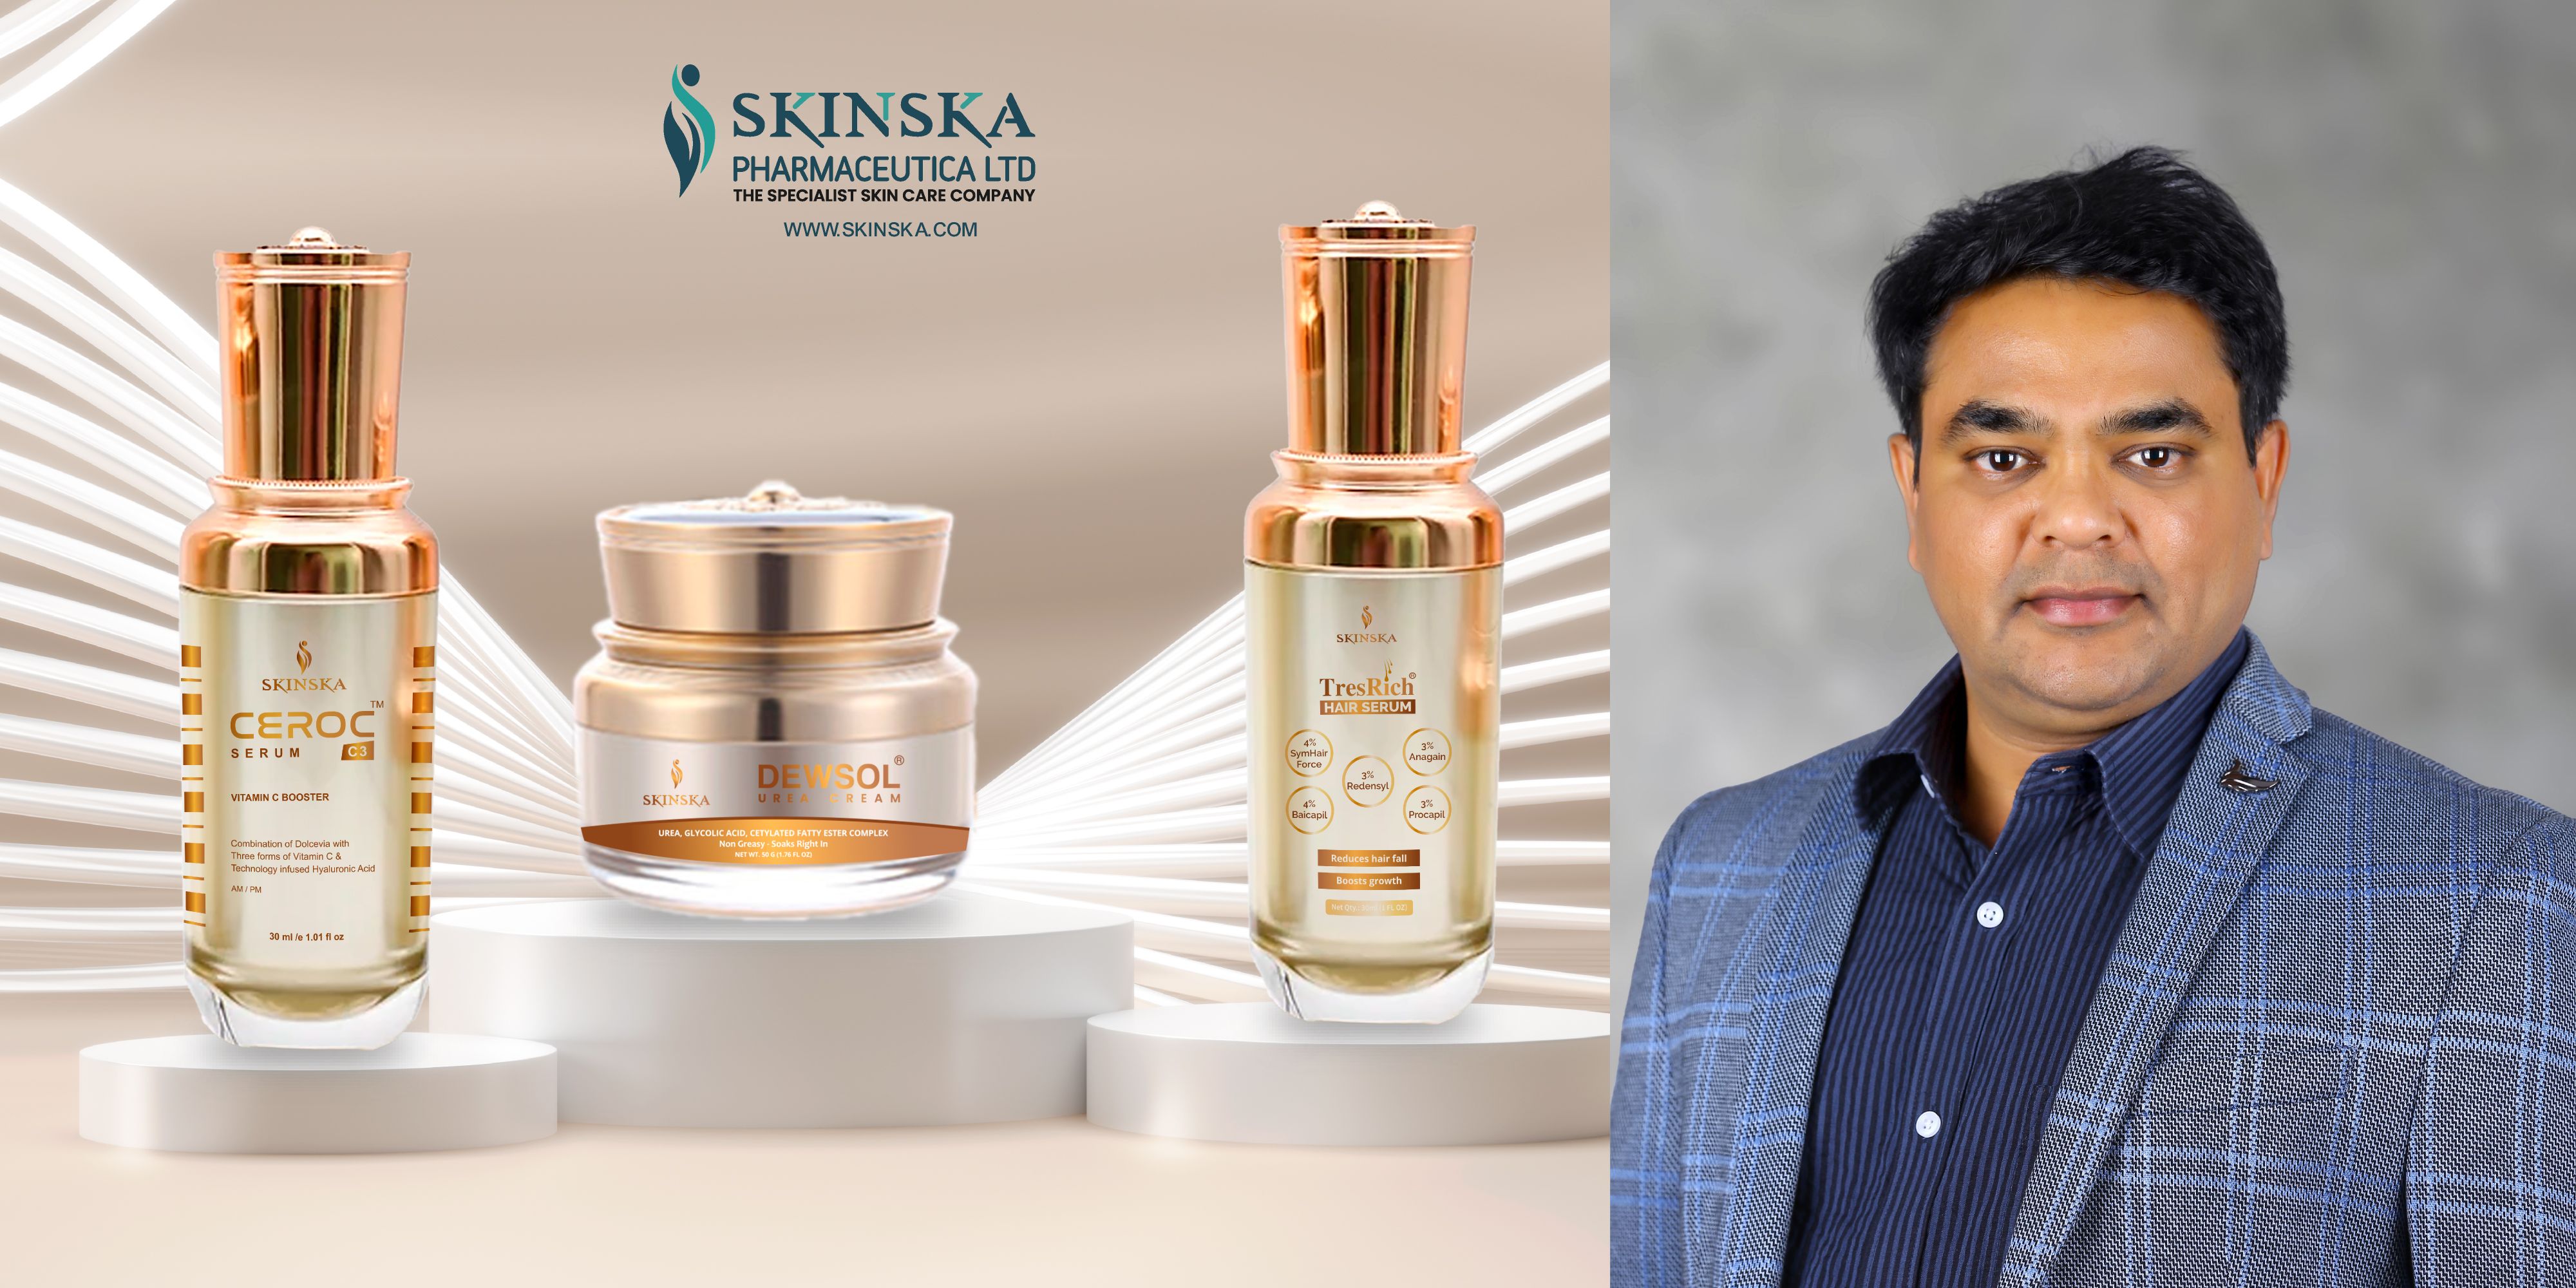 From local to global: Skinska's holistic approach focuses on beauty beyond boundaries 